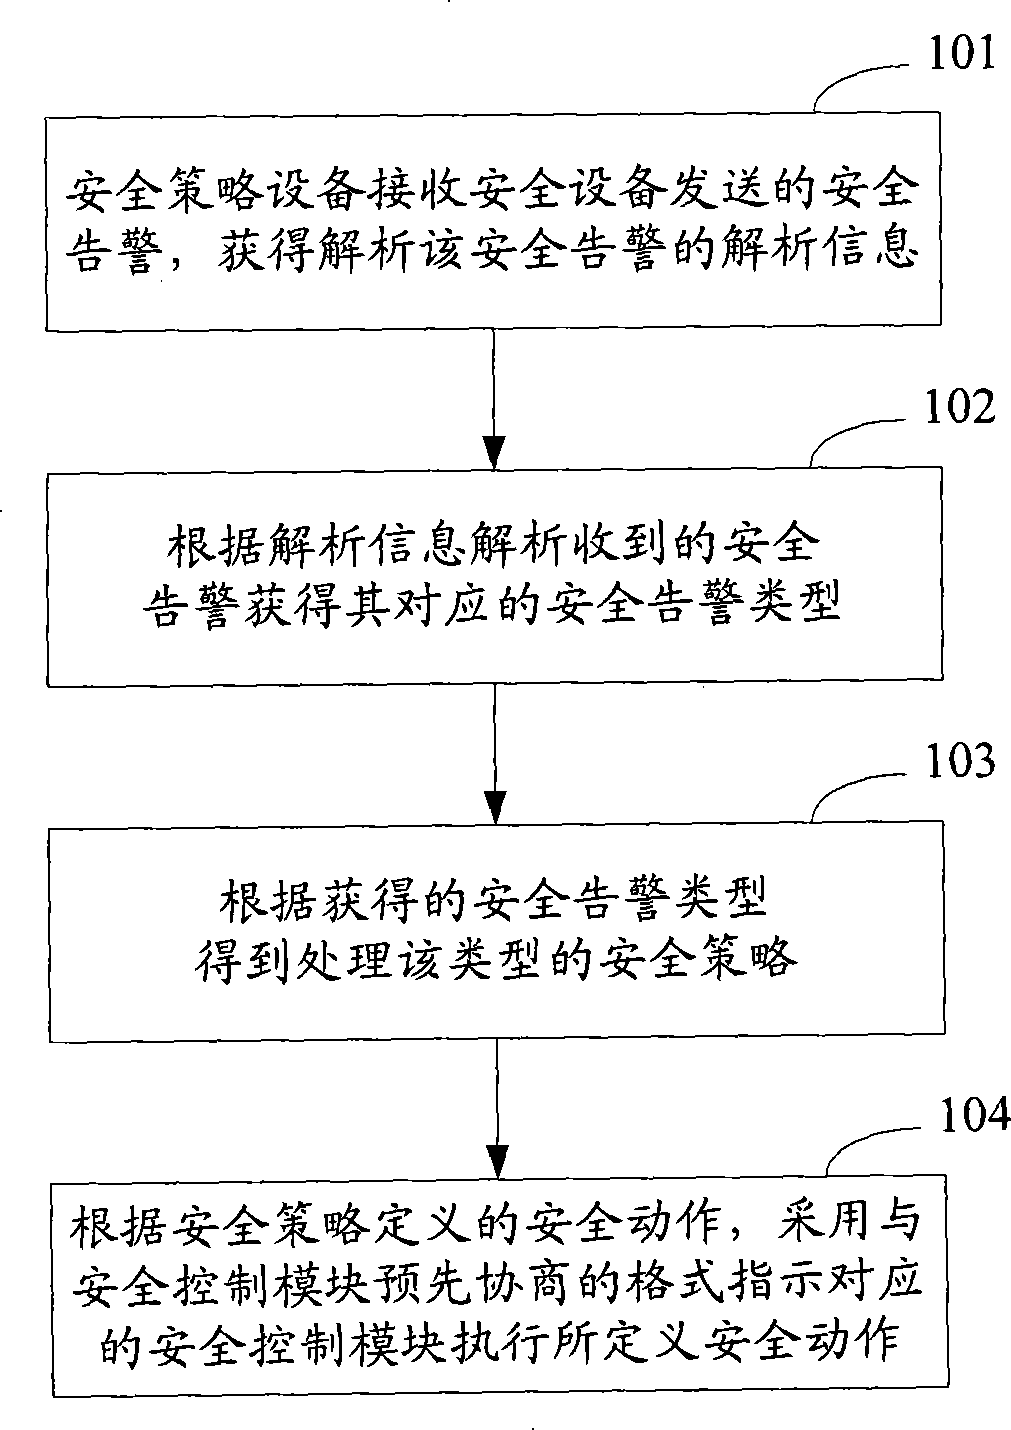 Method for processing safety warning and safety policy equipment